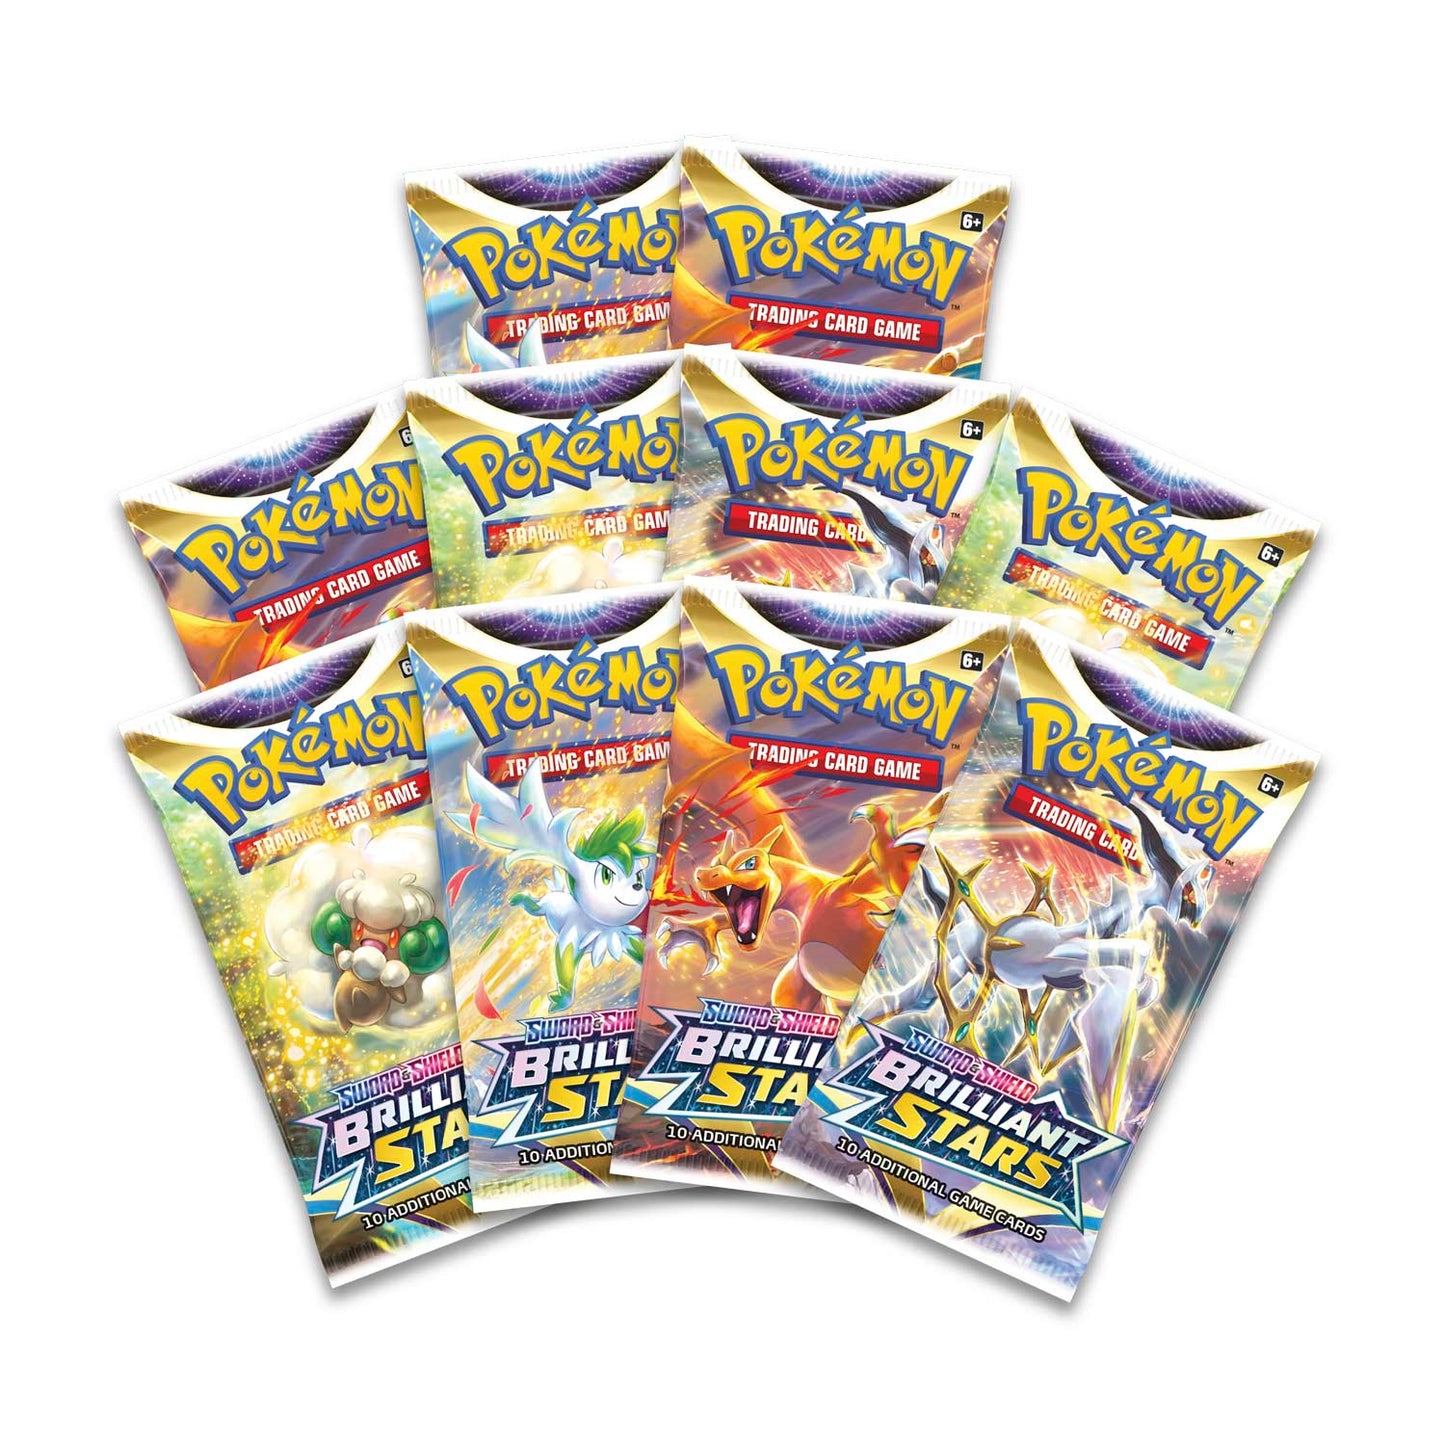 The One Stop Shop Comics & Games Brilliant Stars - Booster Pack Pokemon